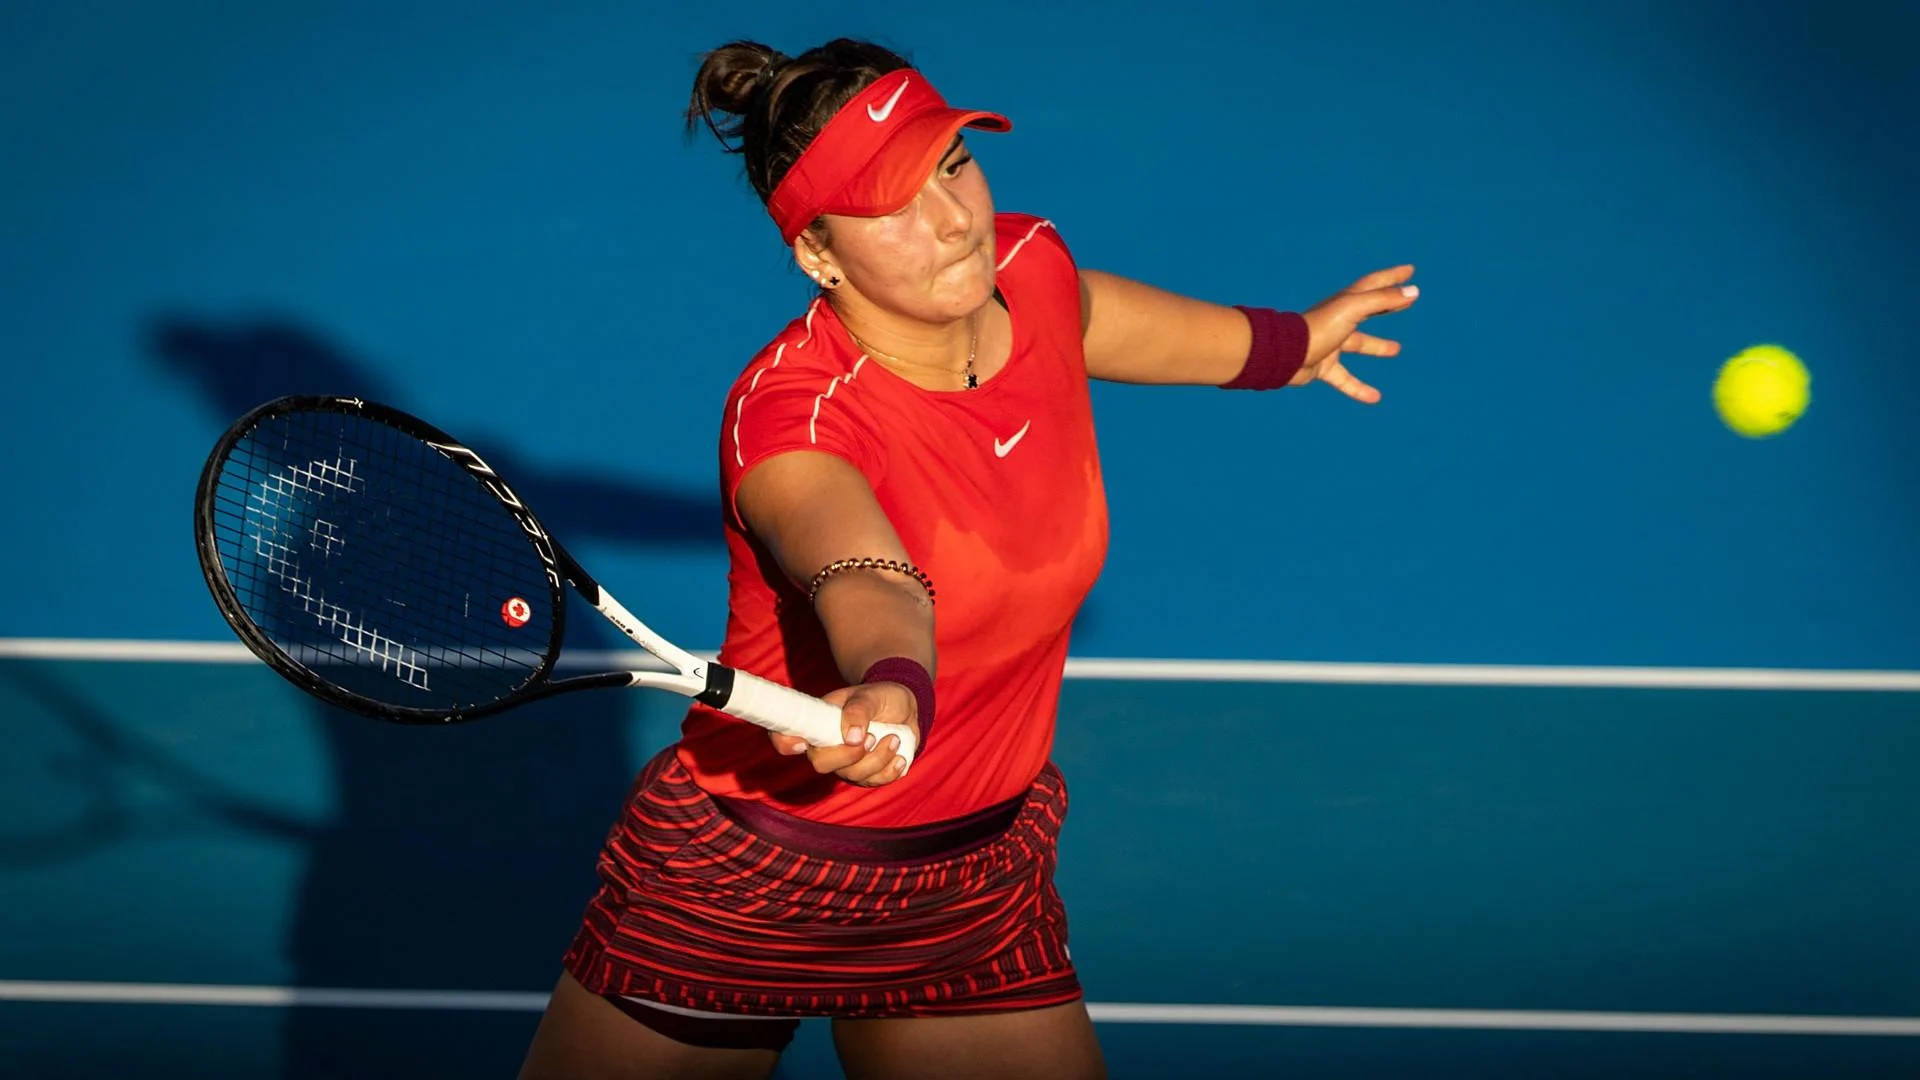 Bianca Andreescu In Action Wallpaper